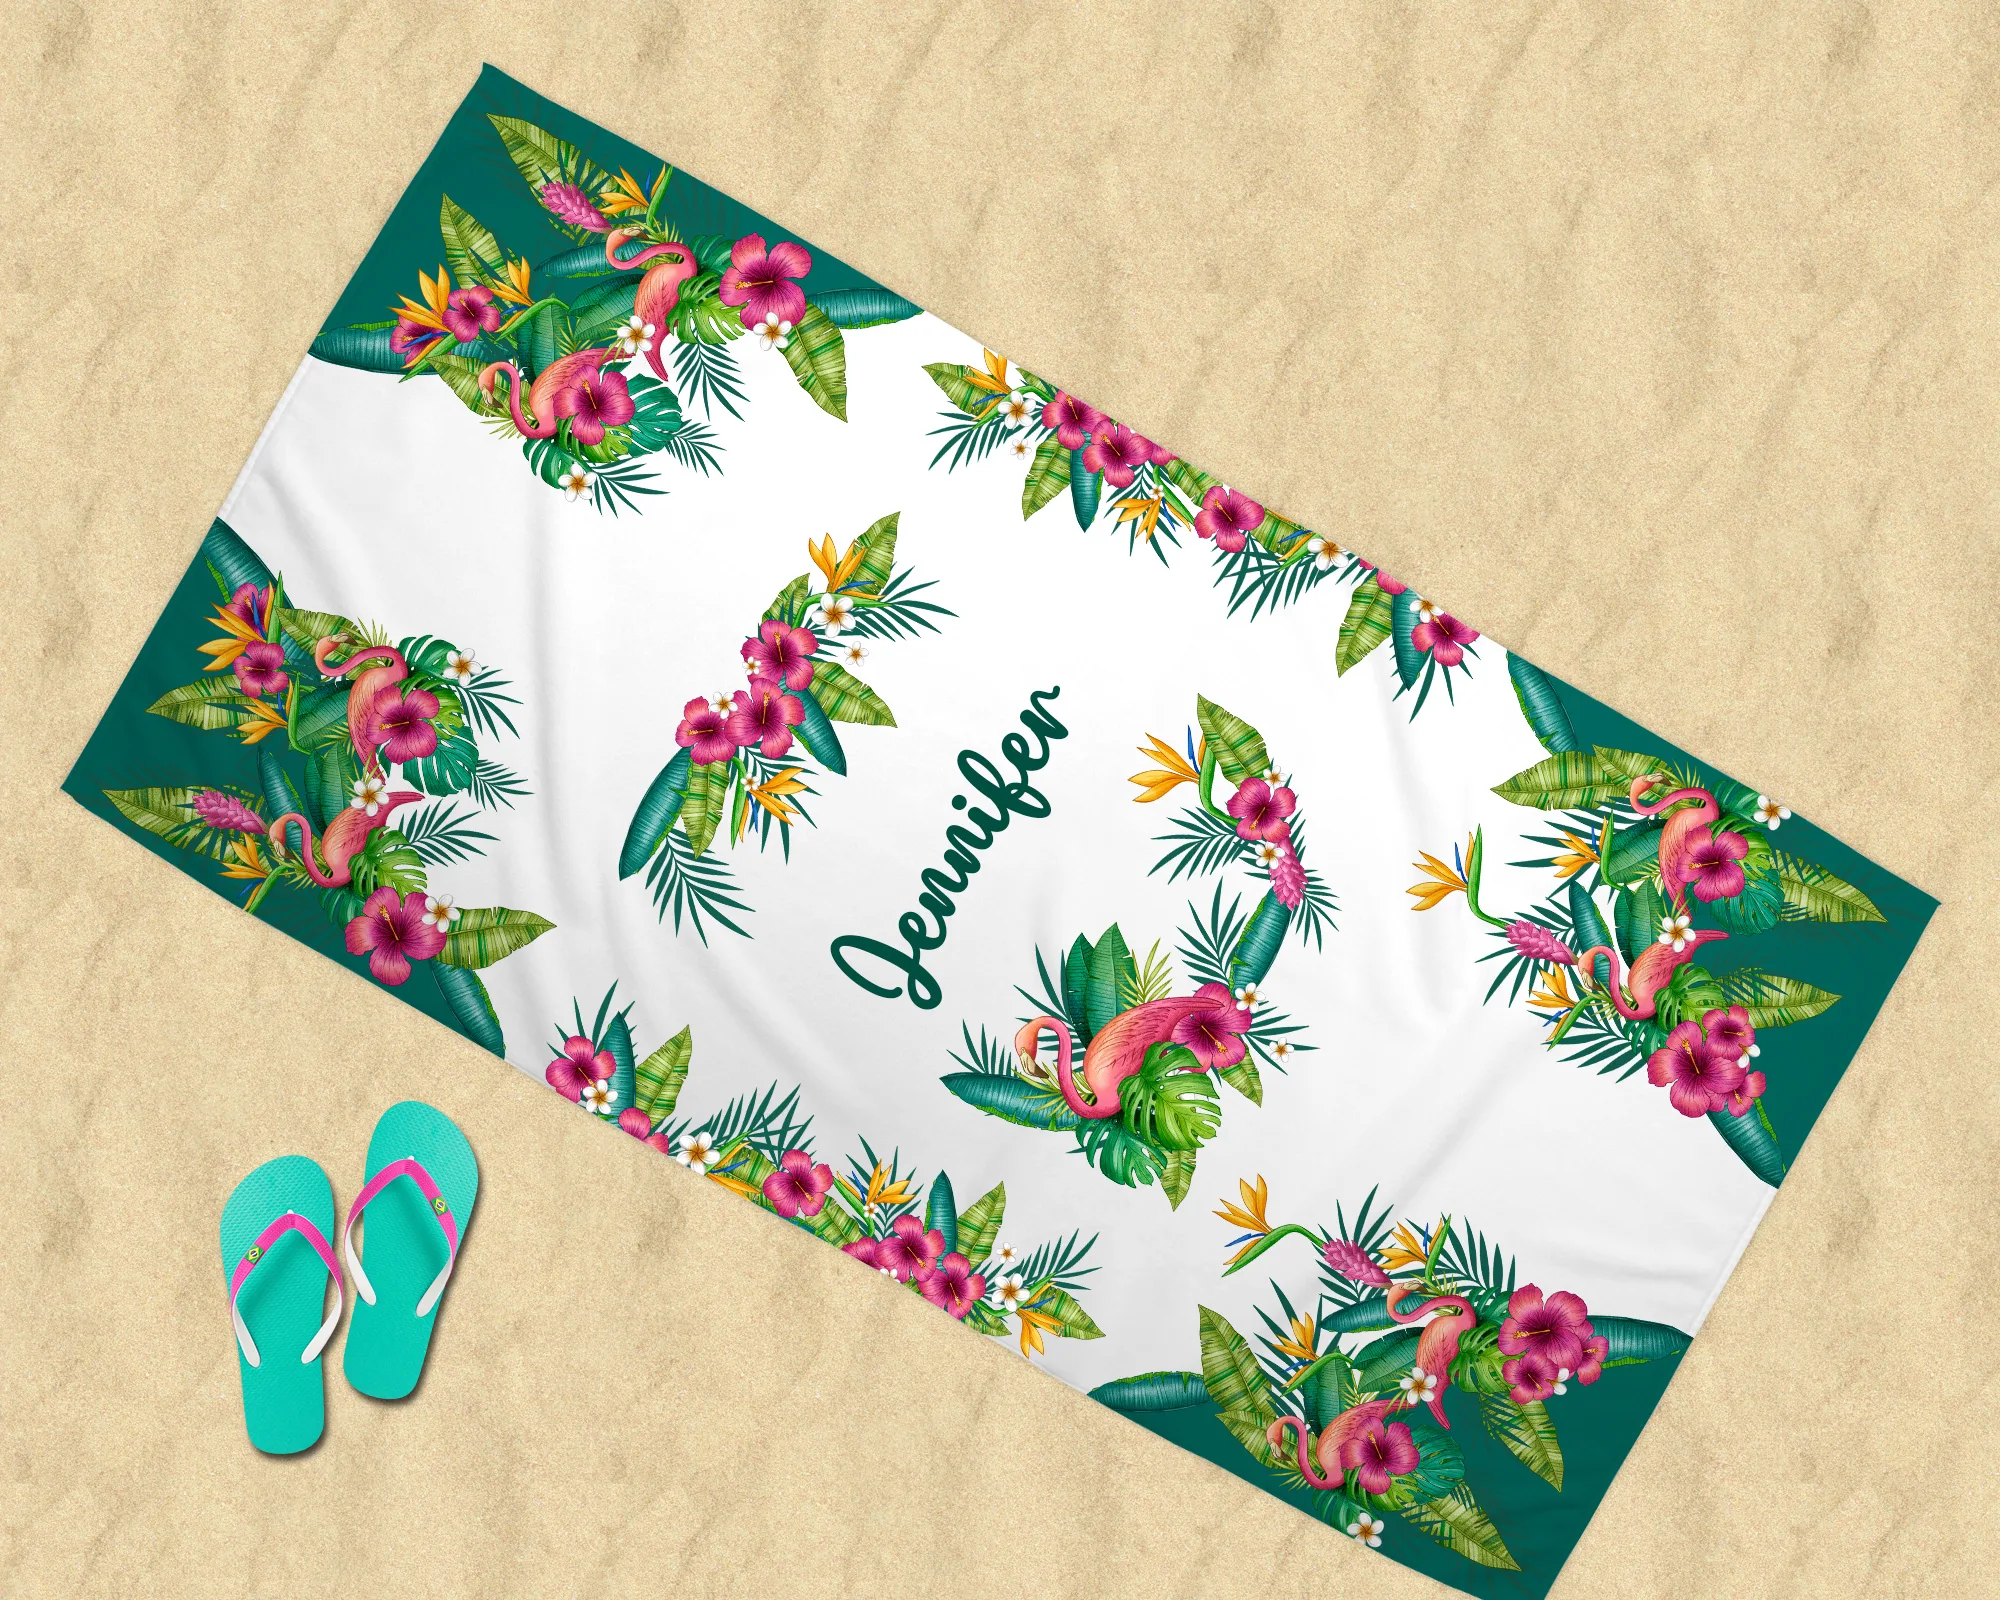 How to Sublimate a Beach Towel